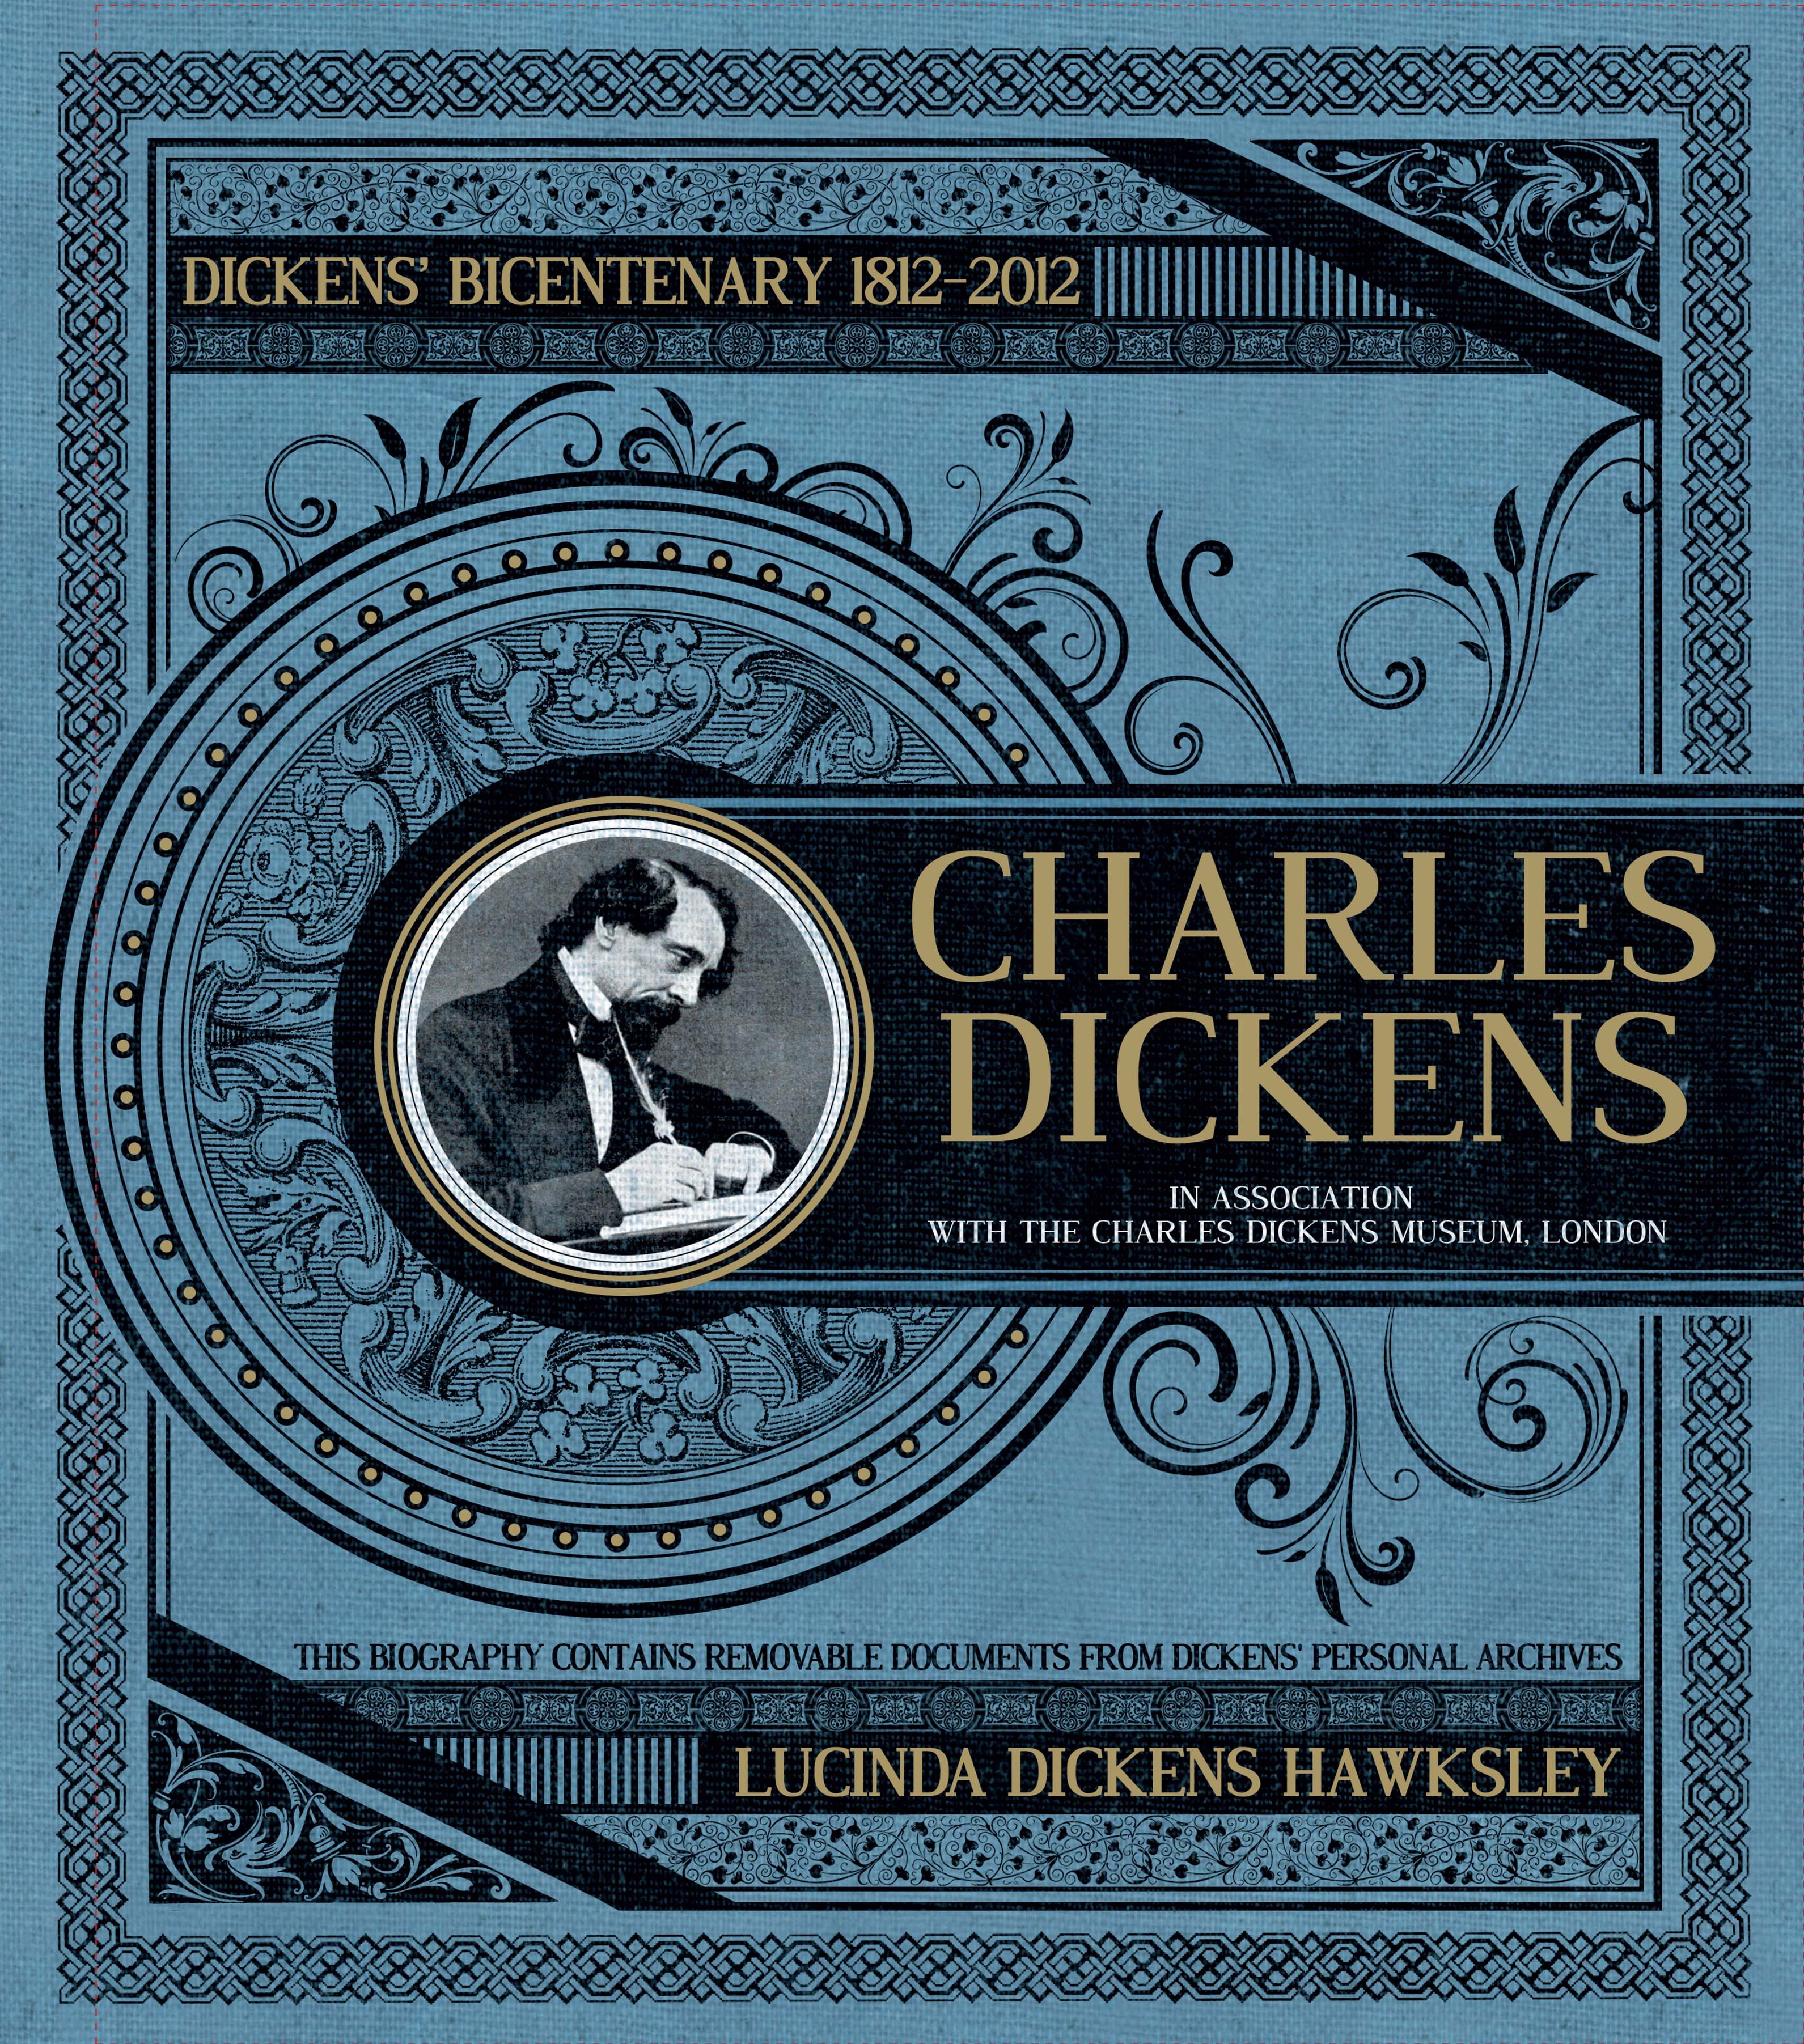 Charles Dickens: The Dickens Bicentenary 1812-2012 Lucinda Dickens Hawksley and The Charles Dickens Museum